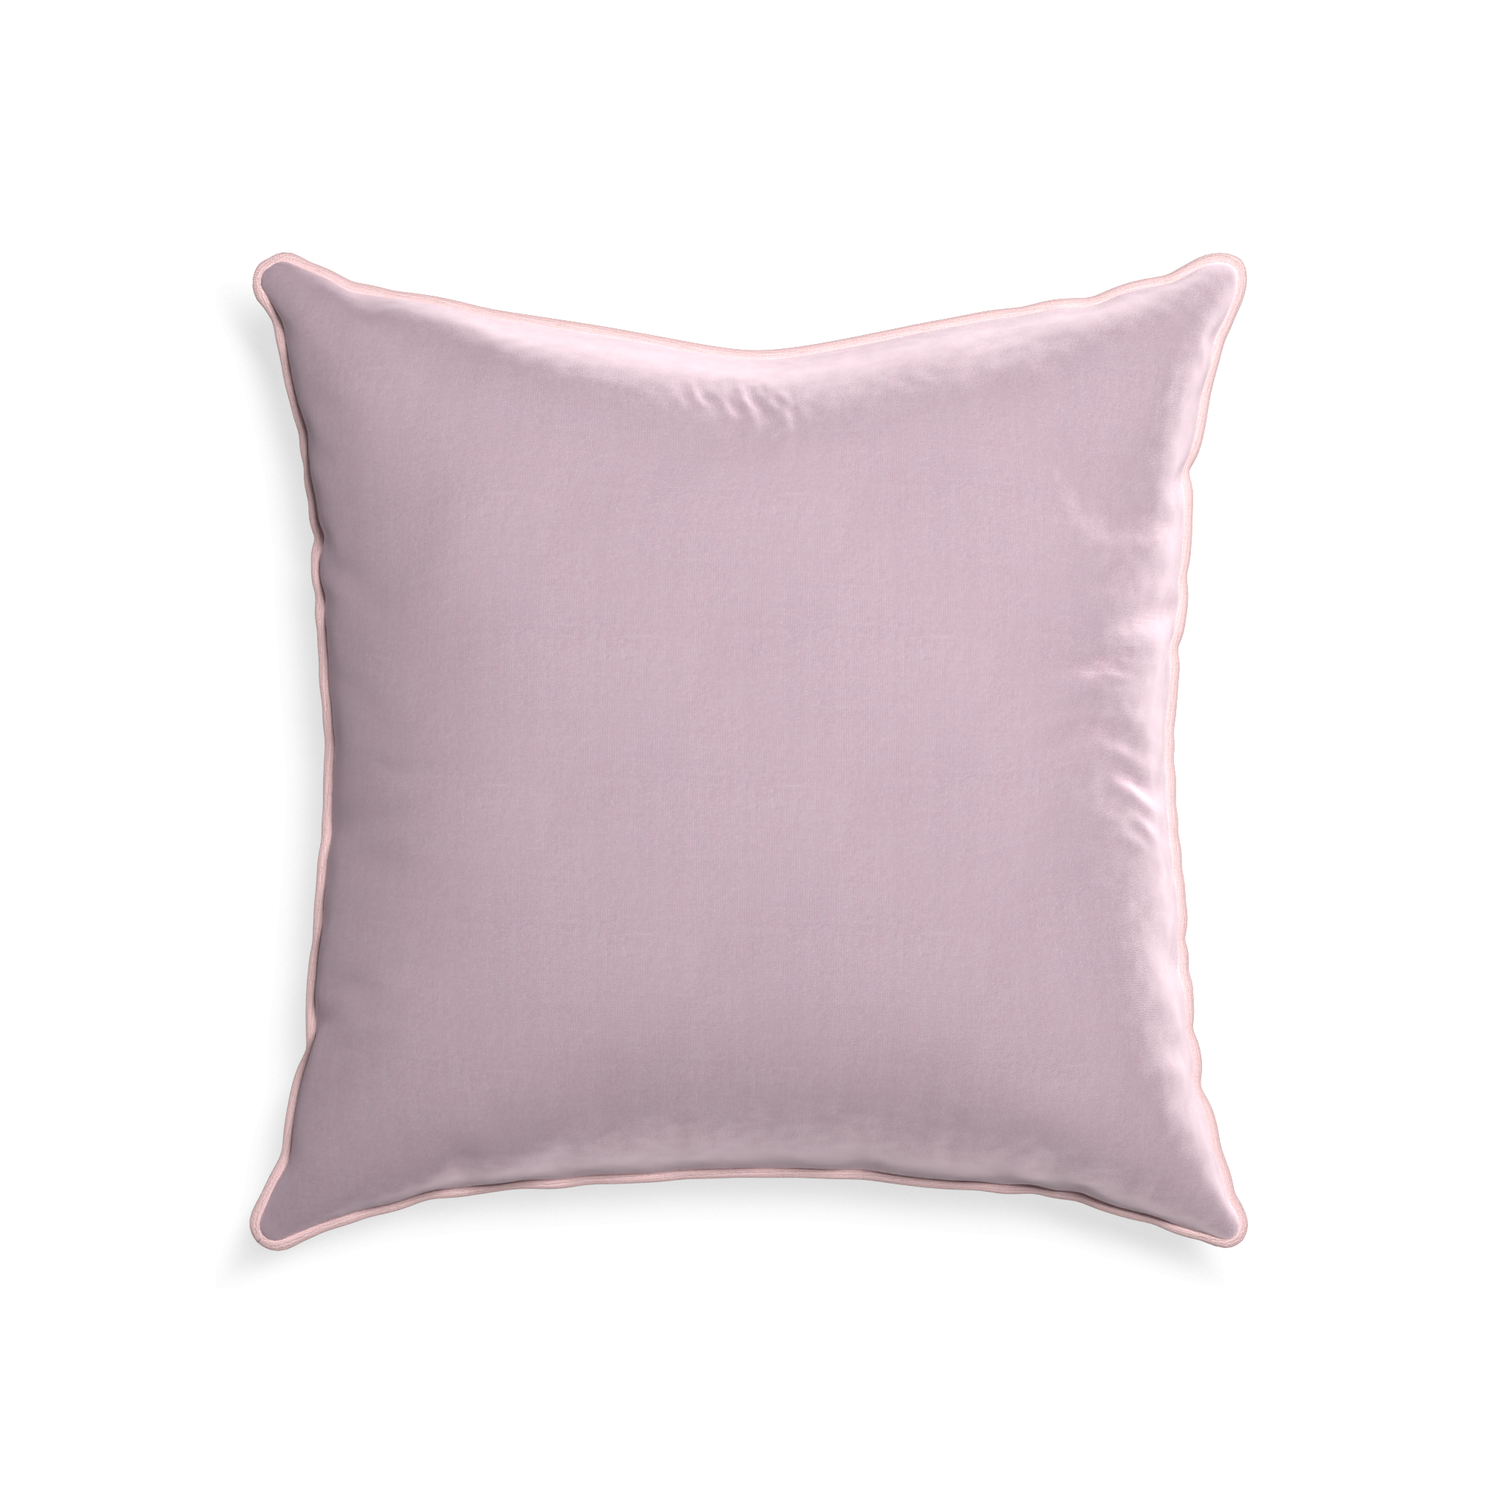 22-square lilac velvet custom pillow with petal piping on white background